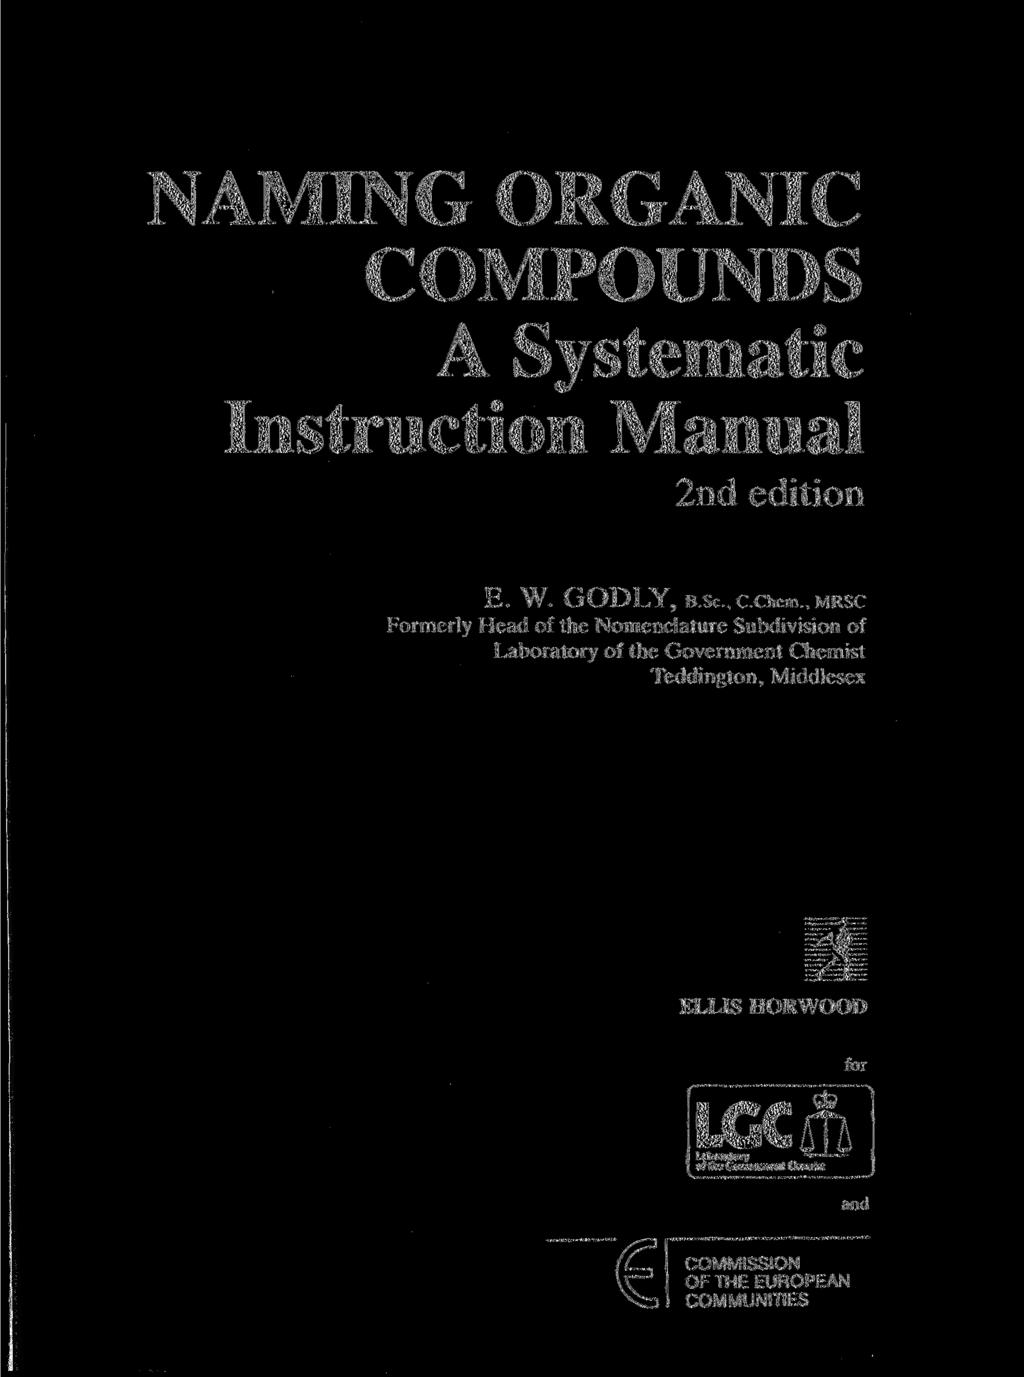 NAMING ORGANIC COMPOUNDS A Systematic Instruction Manual 2nd edition E. W. GODLY, B.Sc.C.Chem.